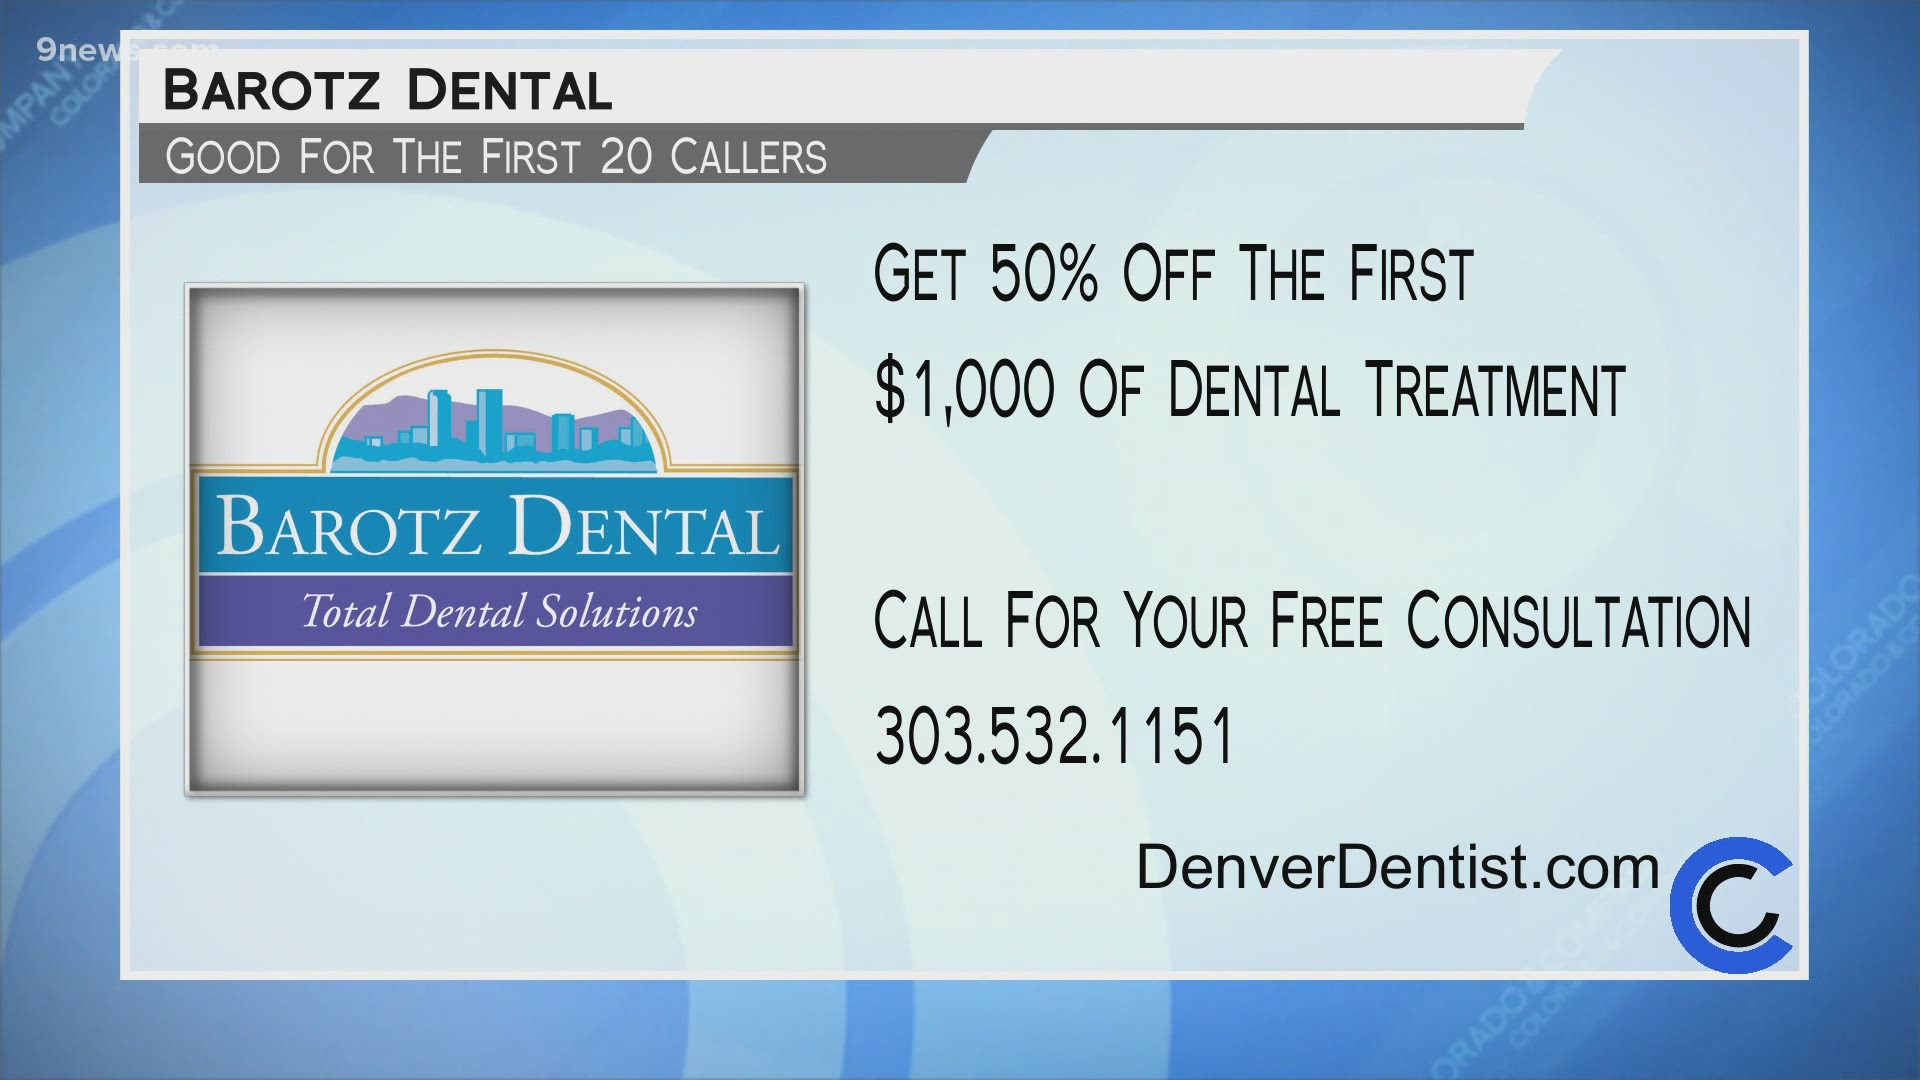 Call Dr. Barotz and his team at 303.532.1151 and get a free consultation. You can visit DenverDentist.com for more information.